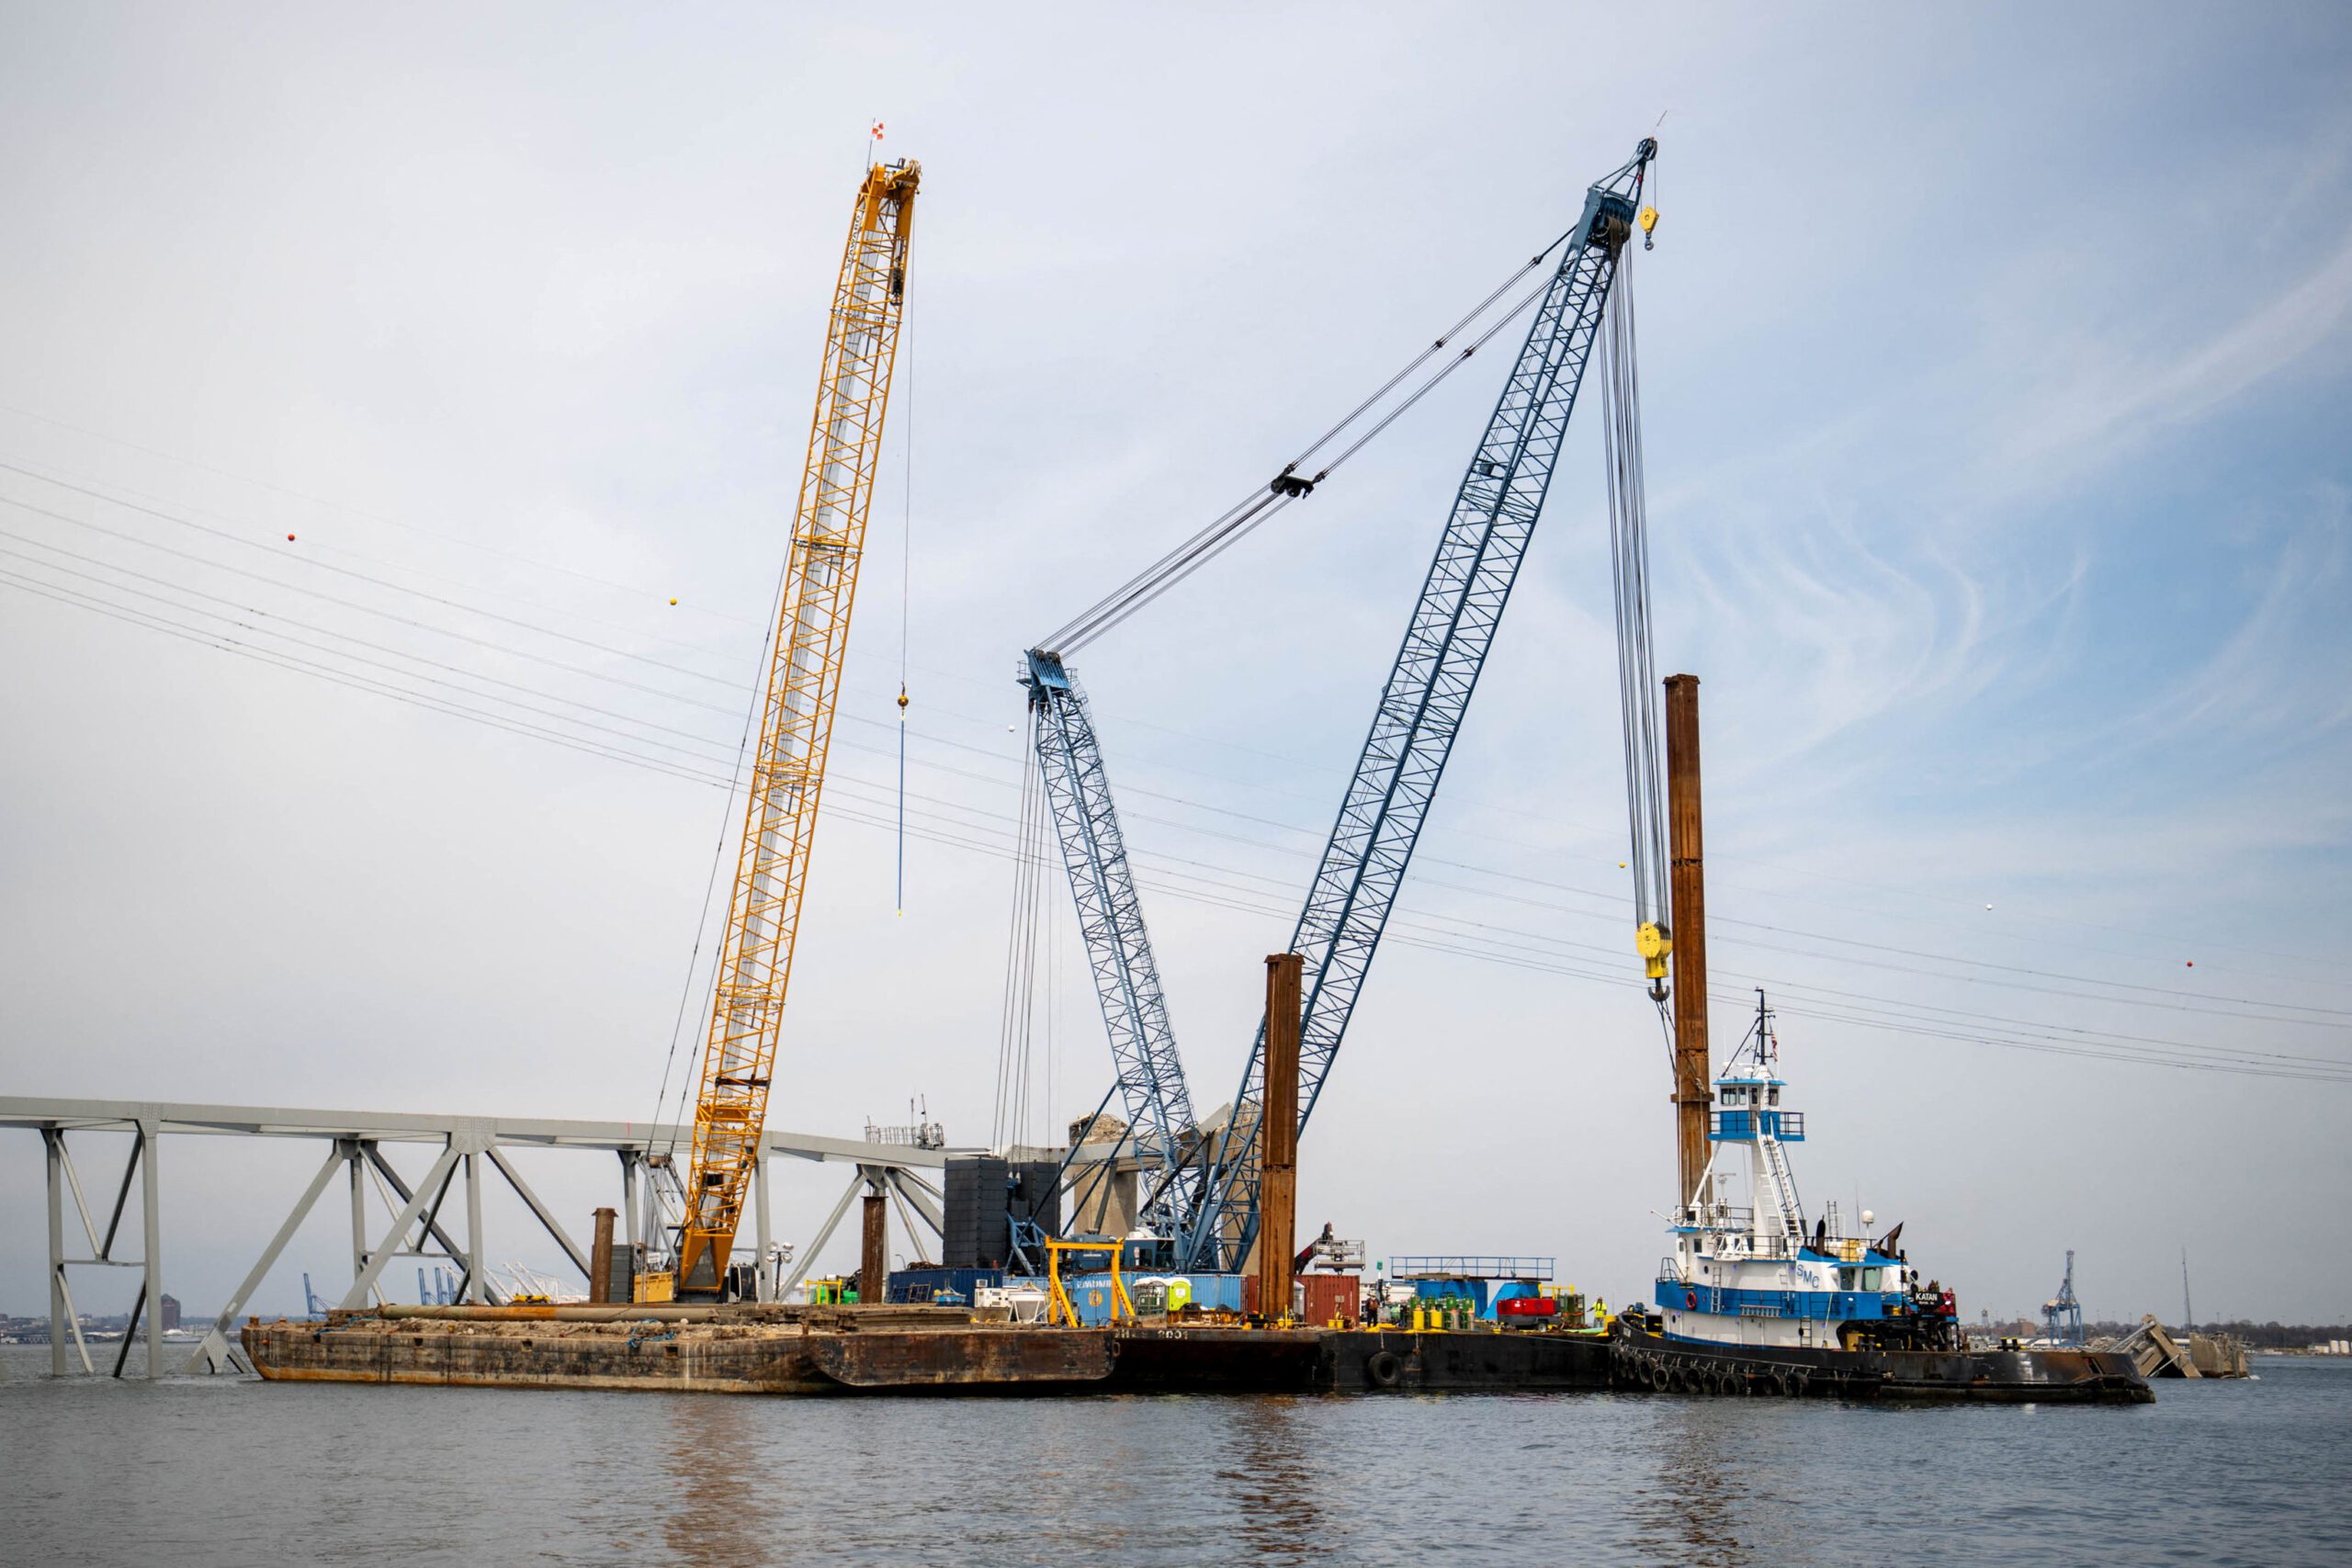 Barge cranes are shown near the collapsed Francis Scott Key Bridge in Baltimore. U.S. Coast Guard/Petty Officer 2nd Class Taylor Bacon/Handout via REUTERS